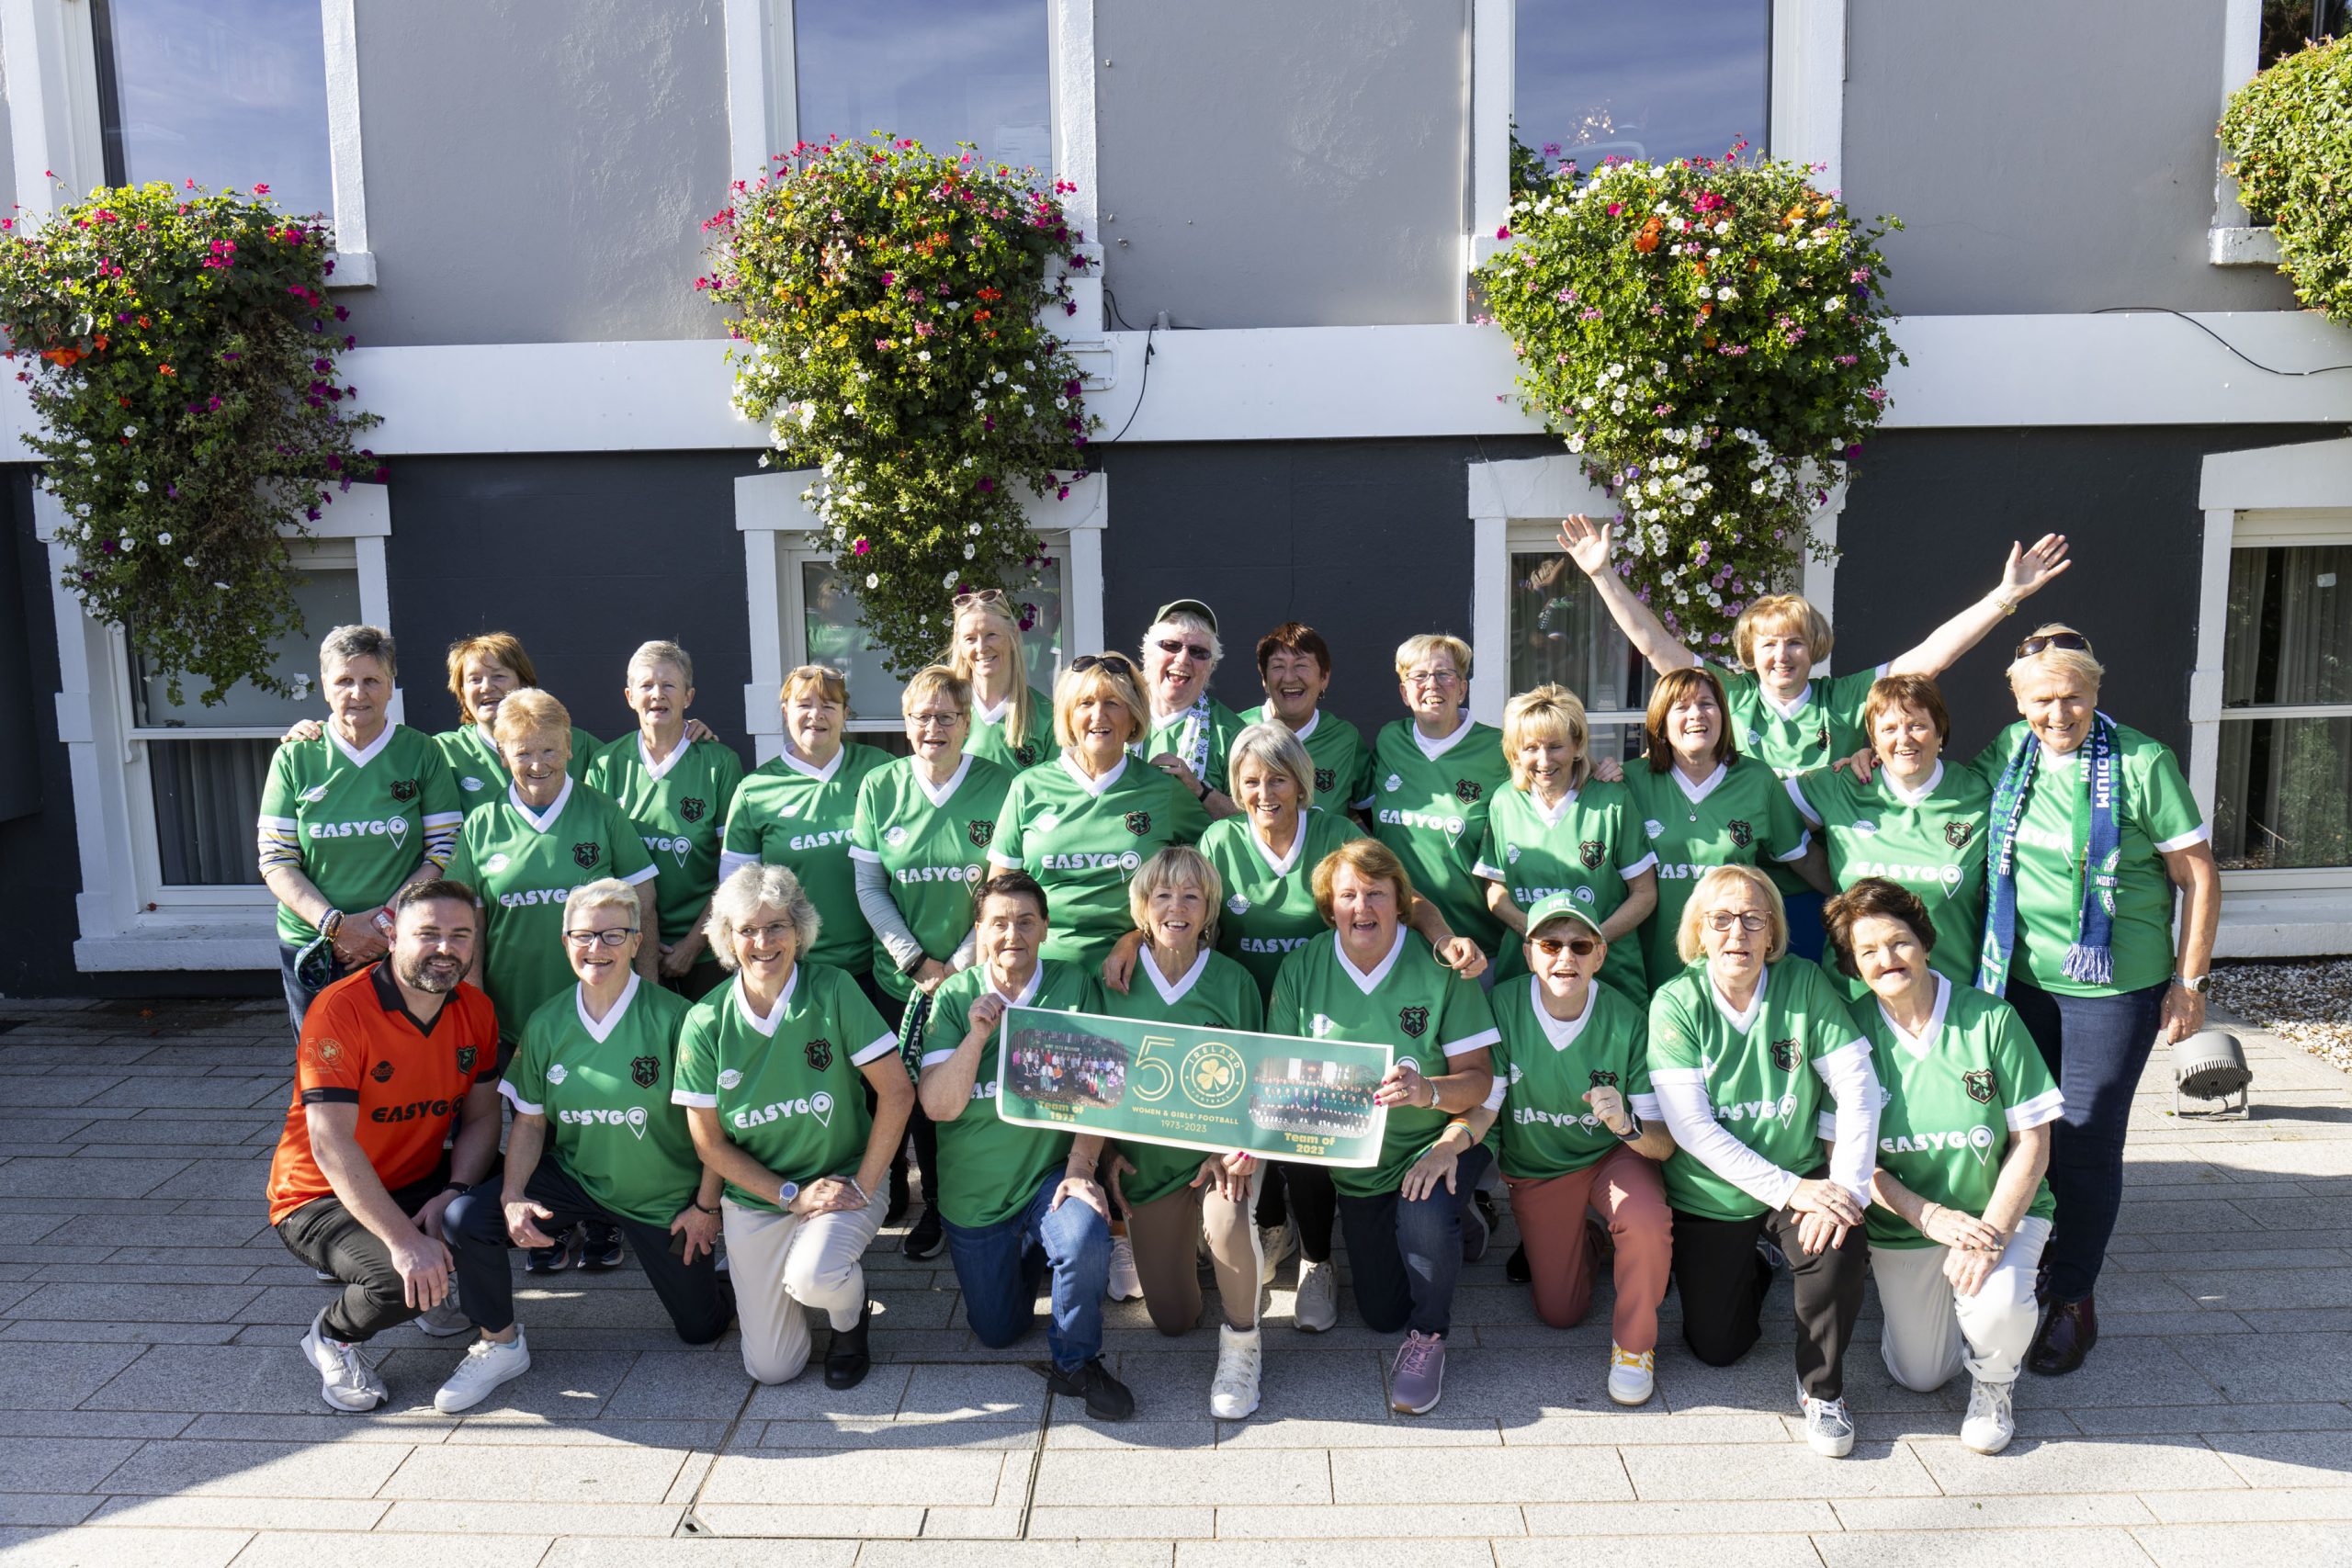 EasyGo presents the 1973 Irish Women’s National team with commemorative jerseys with an image of the jersey